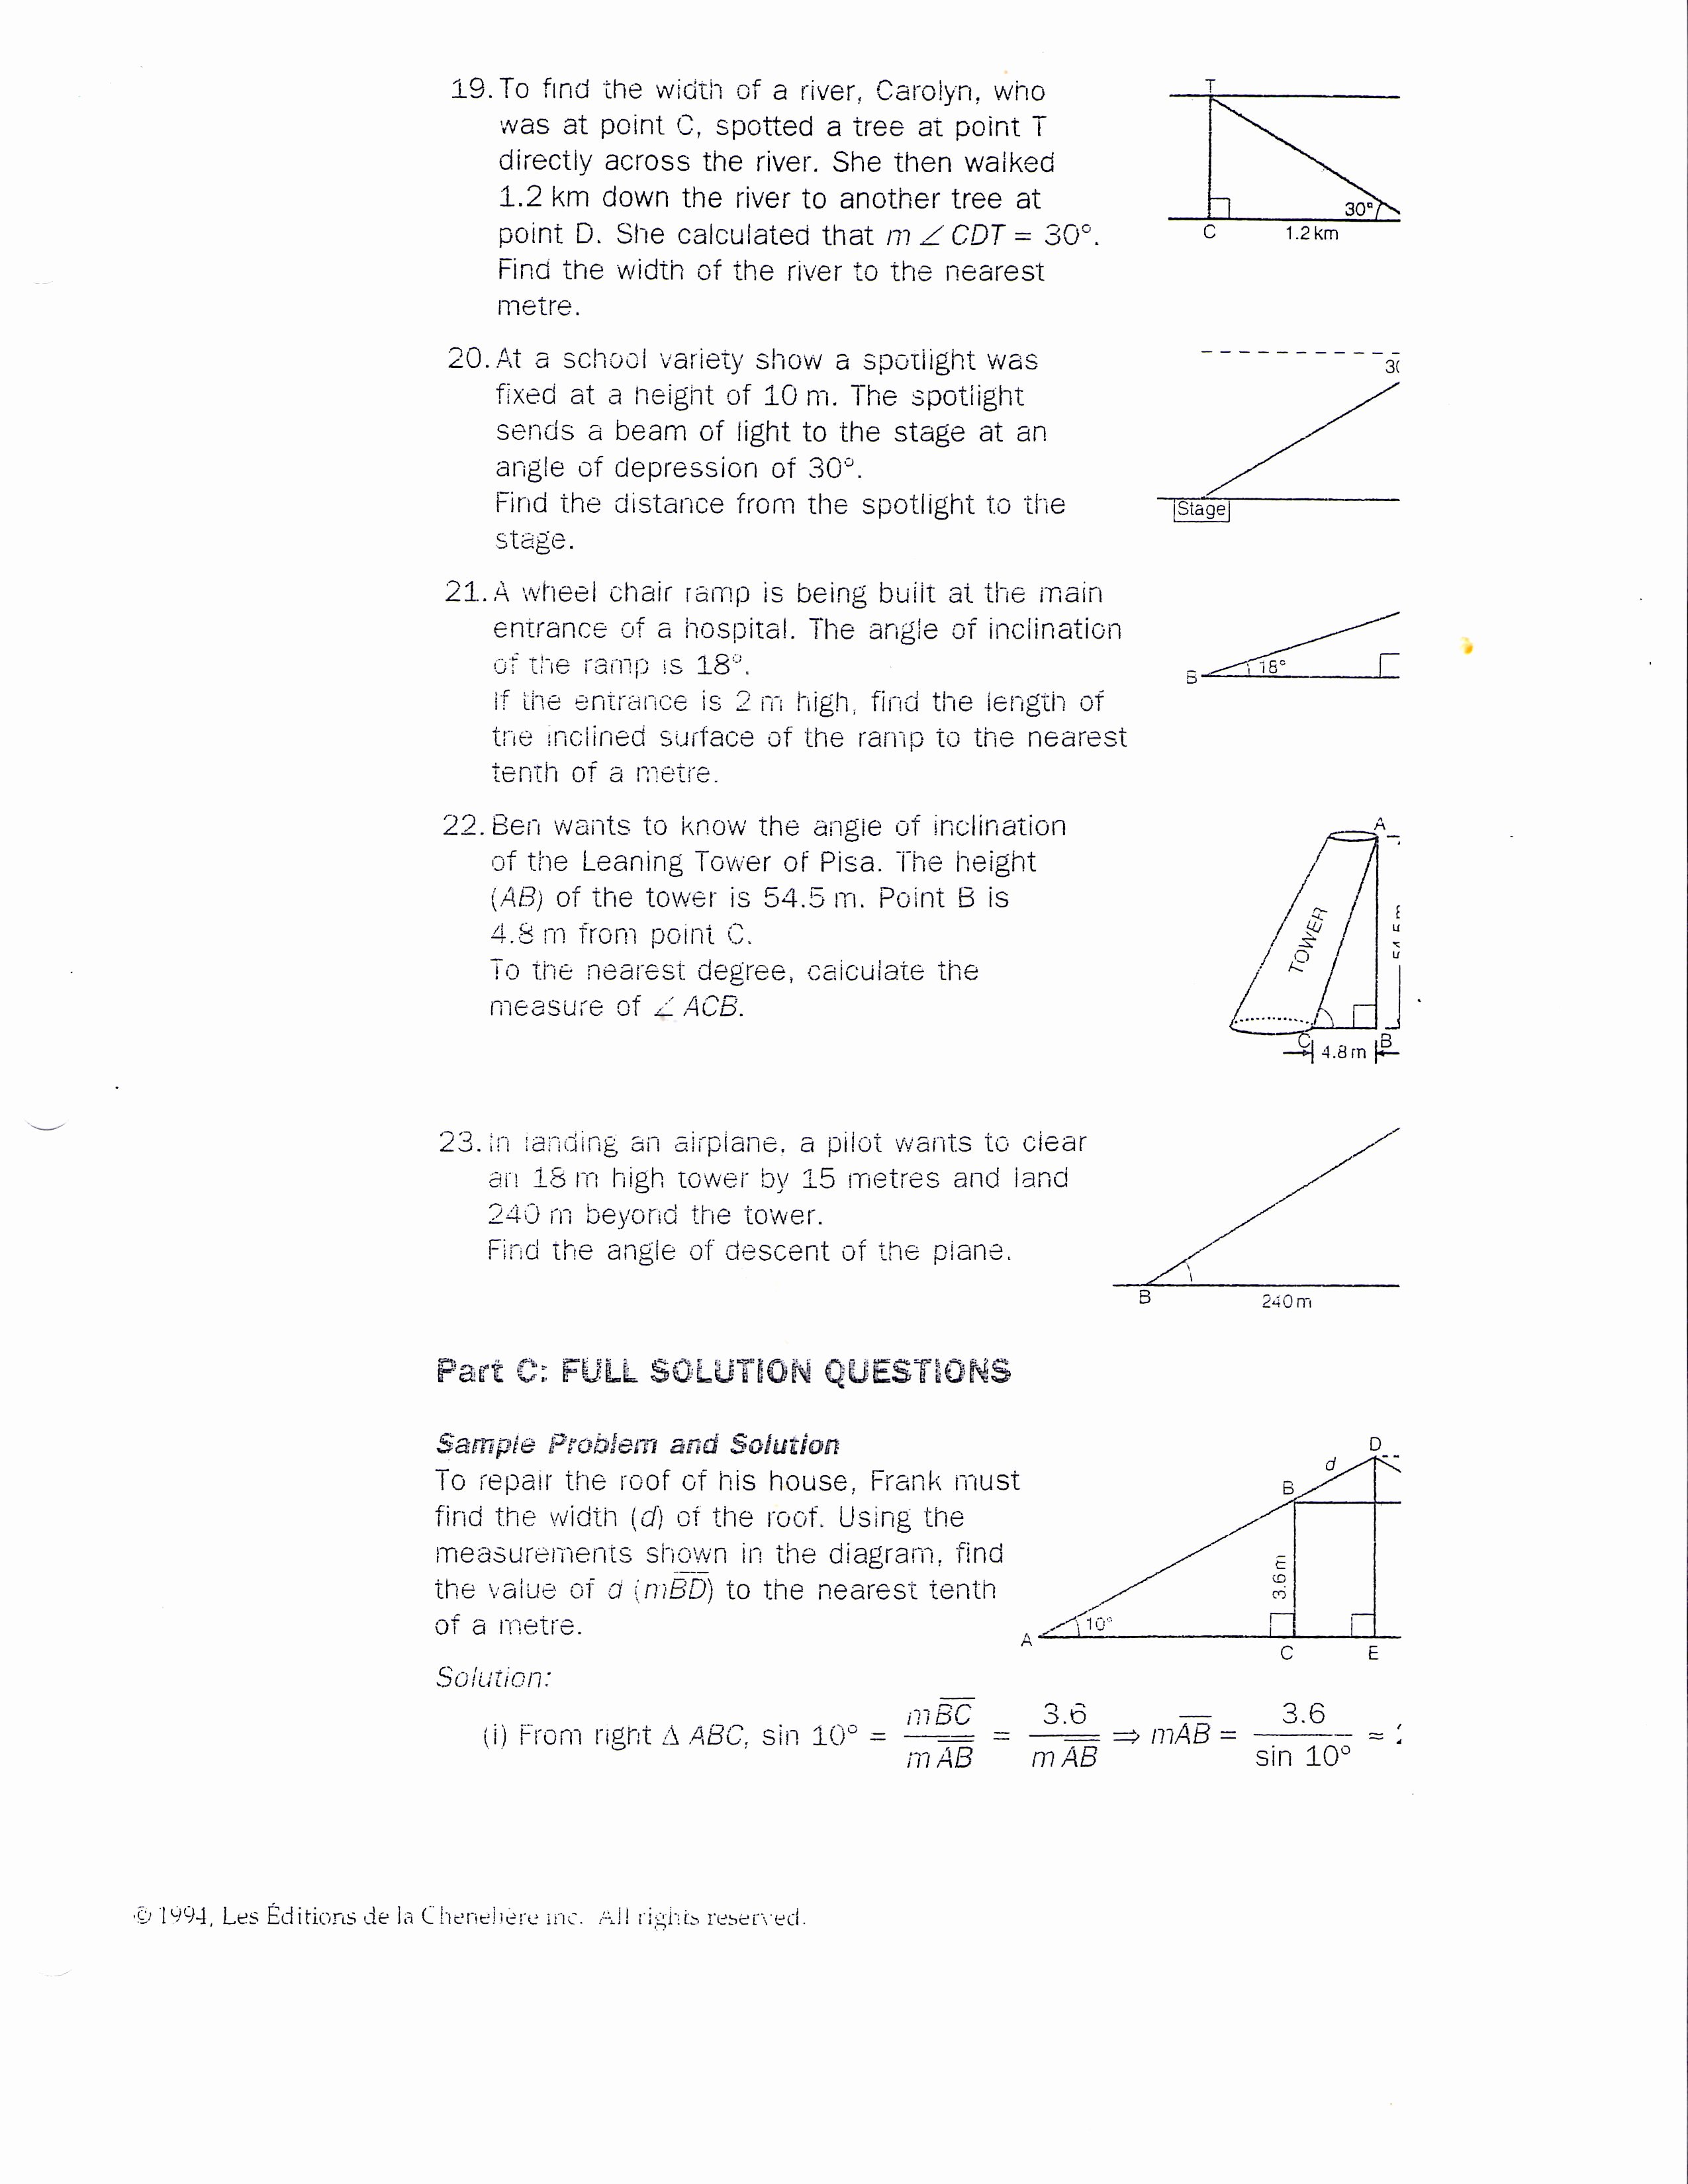 Right Triangle Word Problems Worksheet Beautiful Right Triangle Trigonometry Word Problems Worksheet the